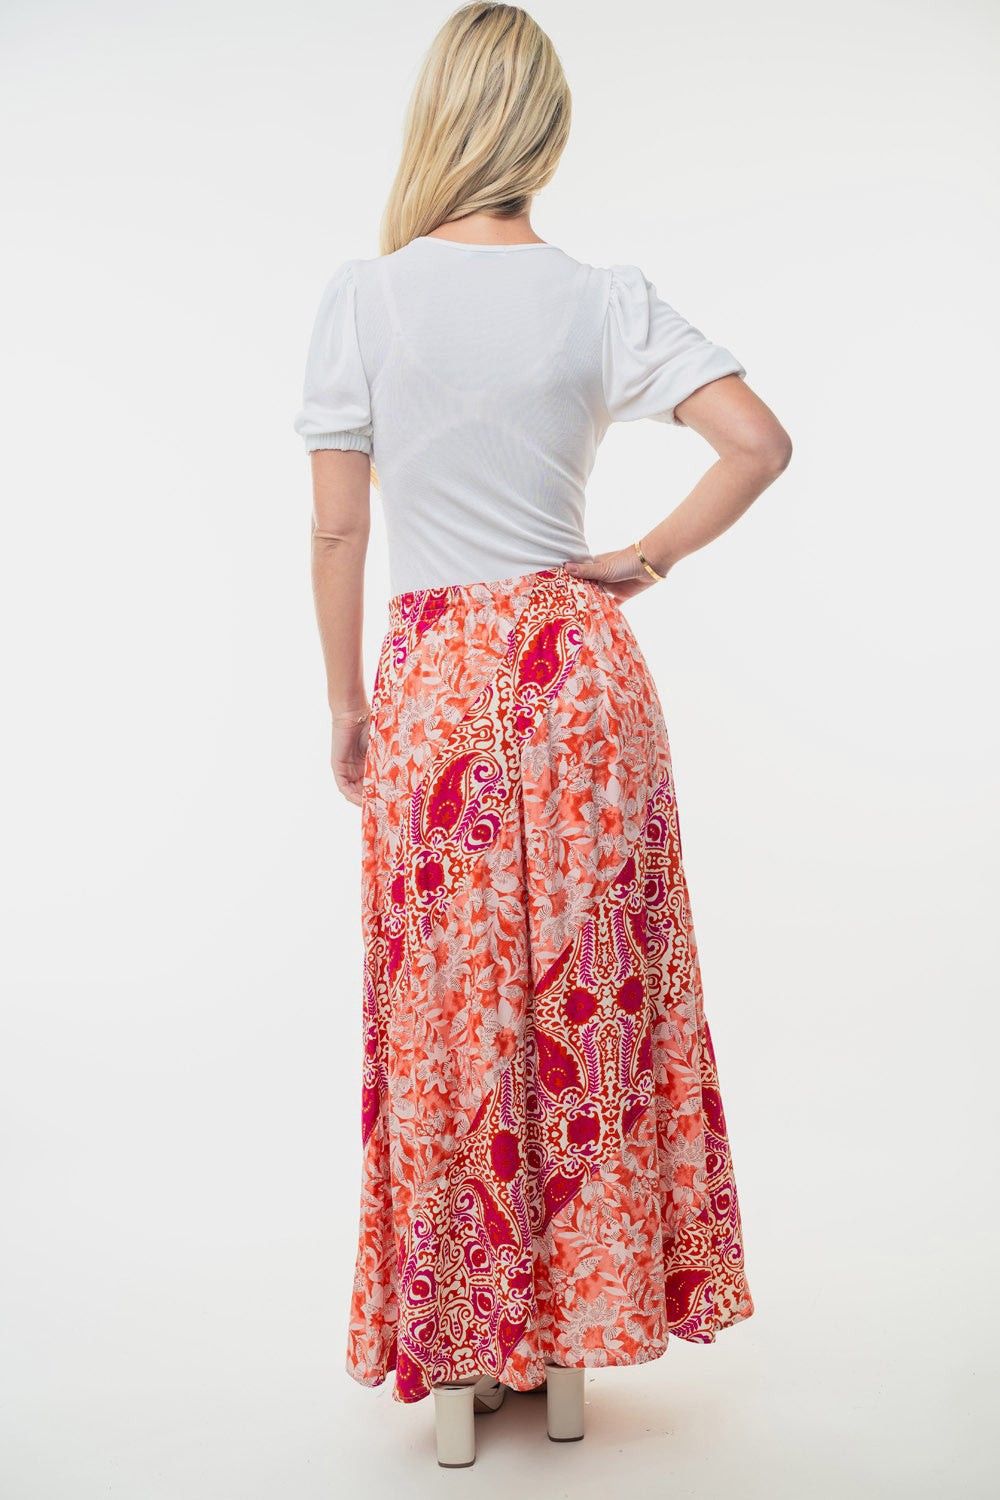 White Birch Full Size High Waisted Floral Woven Skirt - Three Bears Boutique